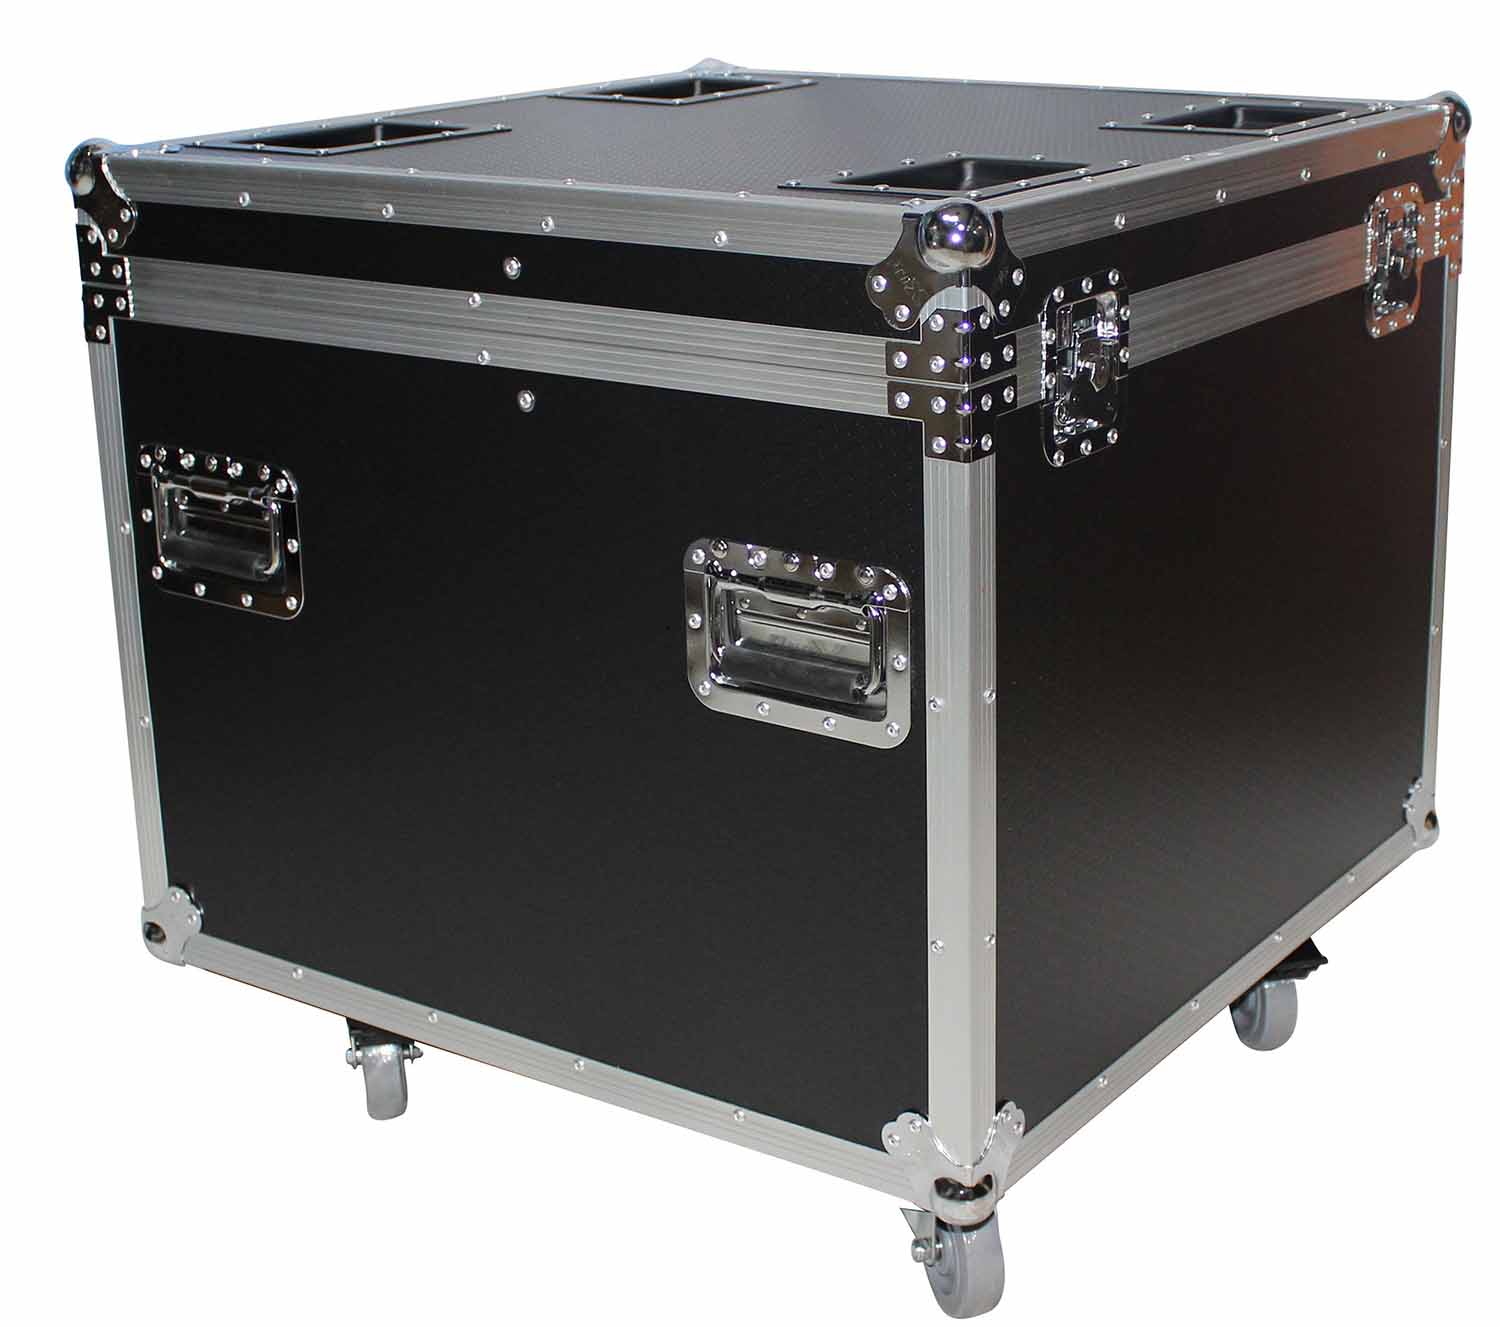 ProX XS-UTL6 Heavy Duty Utility Trunk Case with Caster Cups 4 4" Casters - 29.5" x 29.5" x 29" - Hollywood DJ